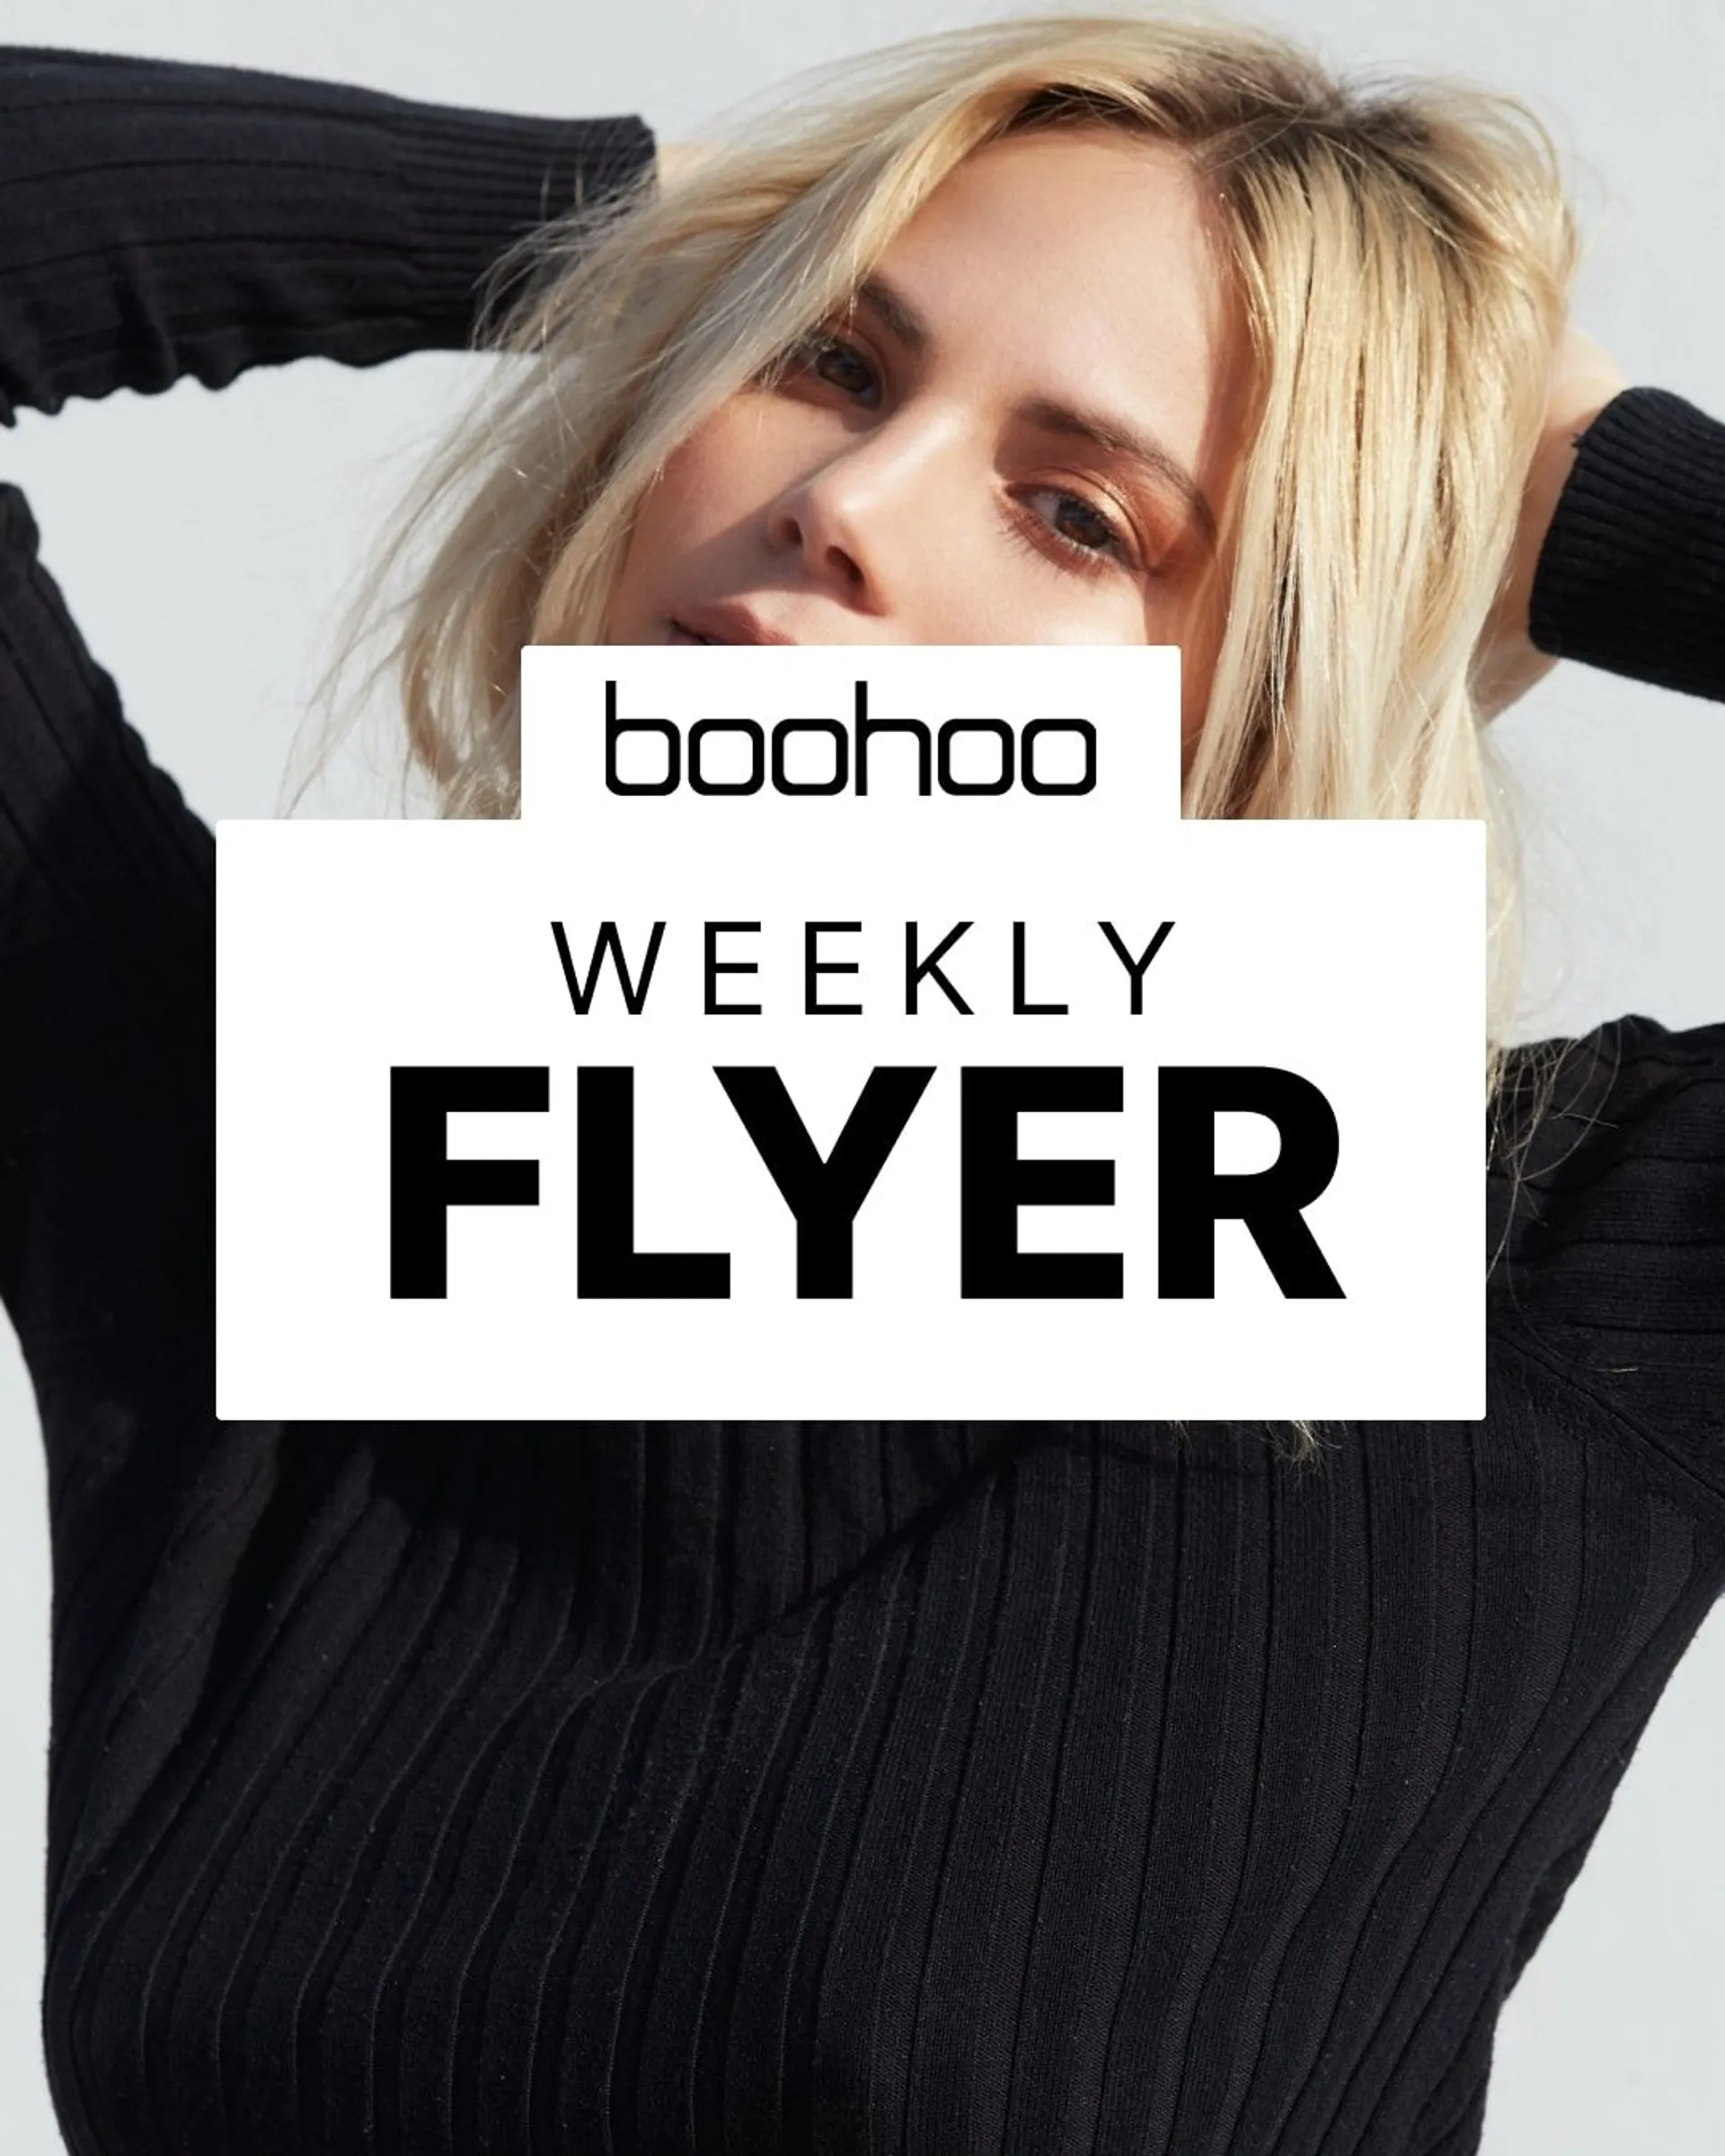 Boohoo - UP TO 70% OFF! from 23 January to 28 January 2023 - Catalogue Page 1